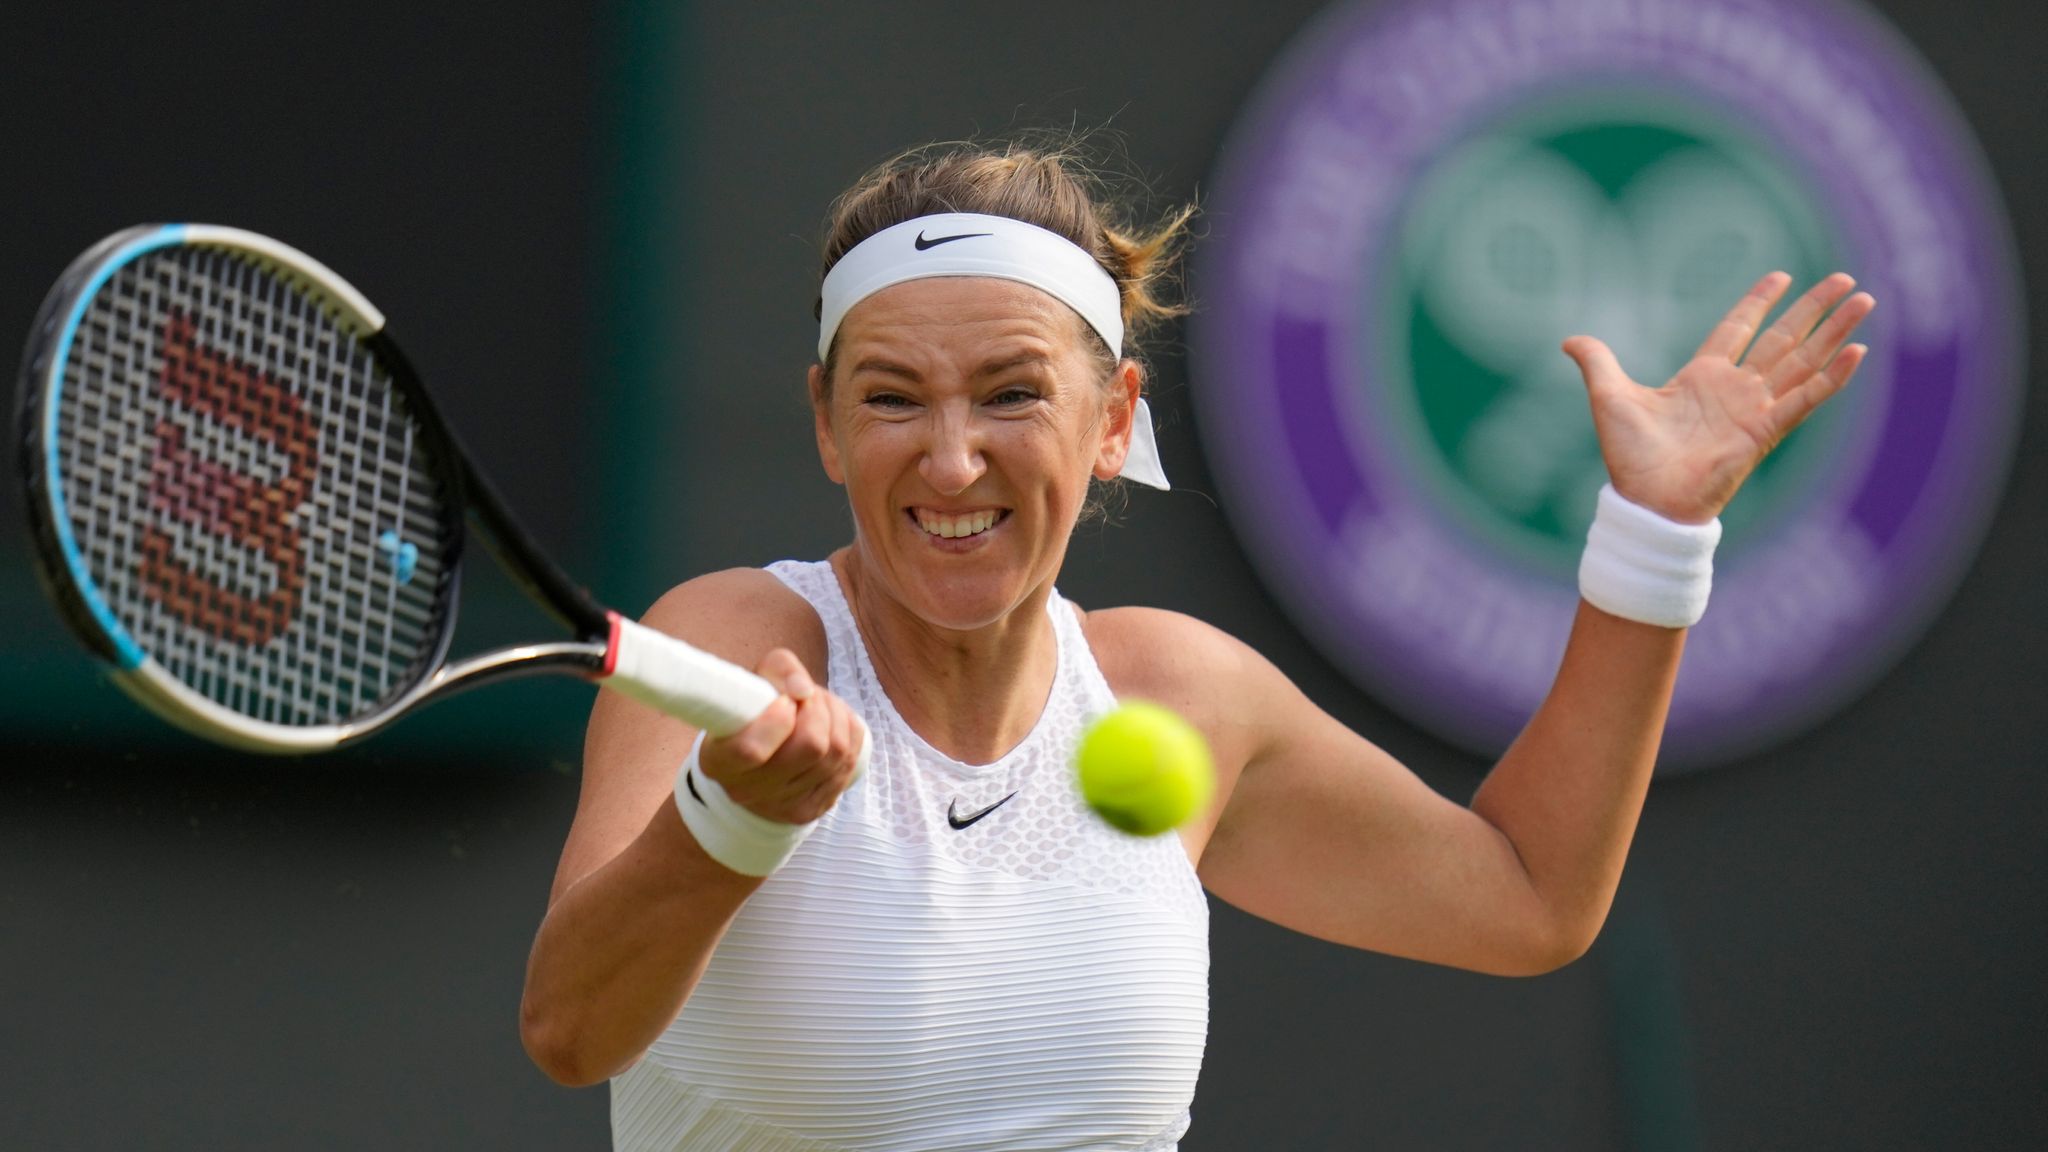 Wimbledon Belarus Victoria Azarenka sees no sense in ban of players from Russia and her home country Tennis News Sky Sports